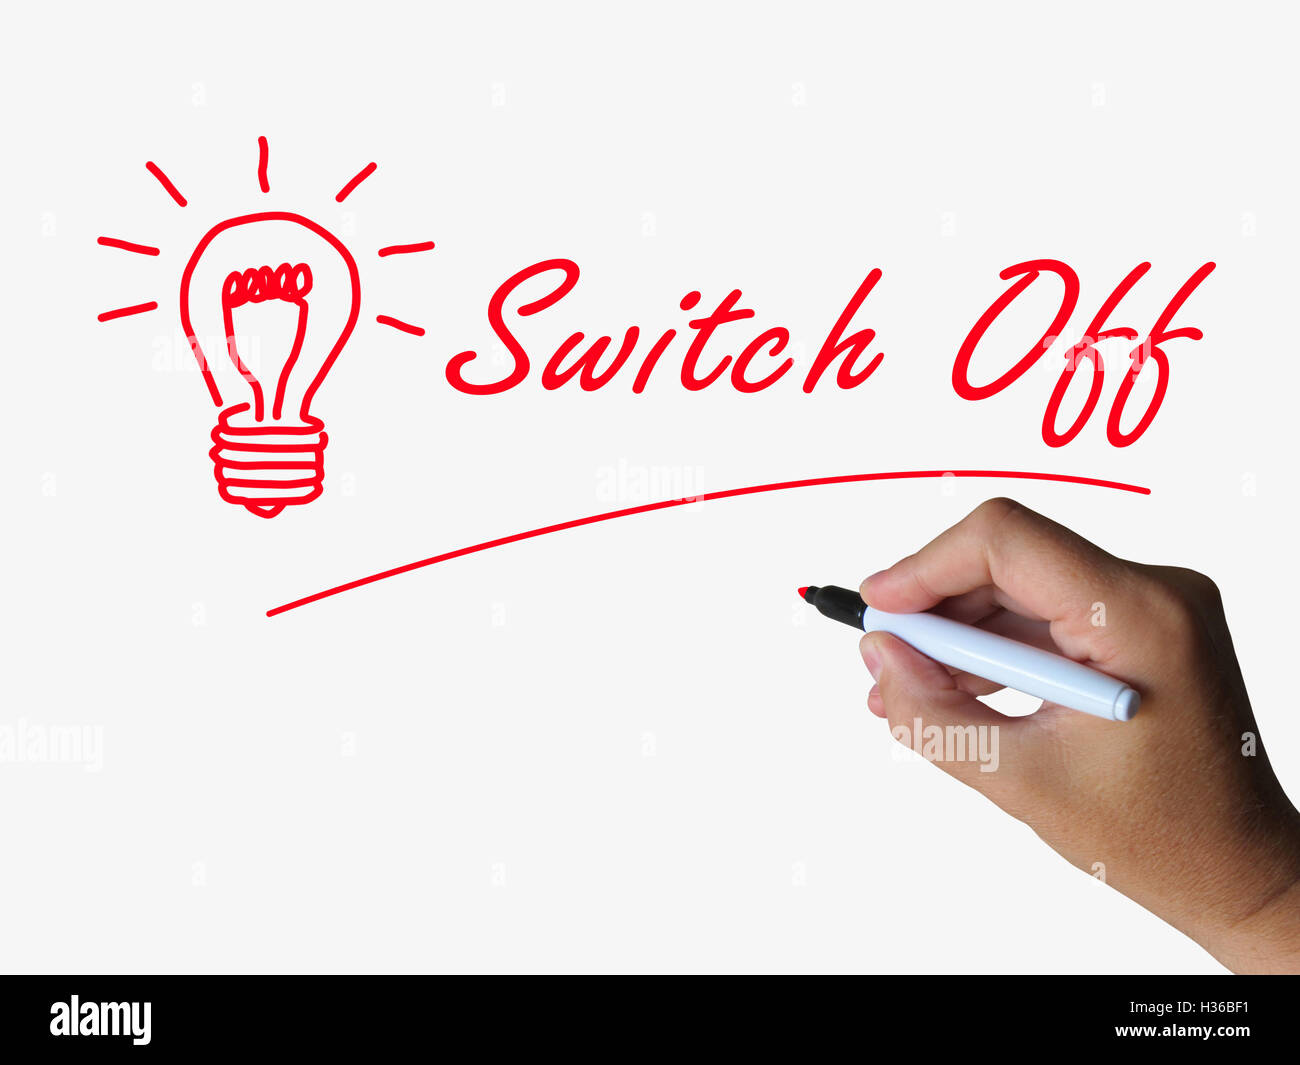 Switch Off Lightbulb Refers to Switching or Turning Stock Photo